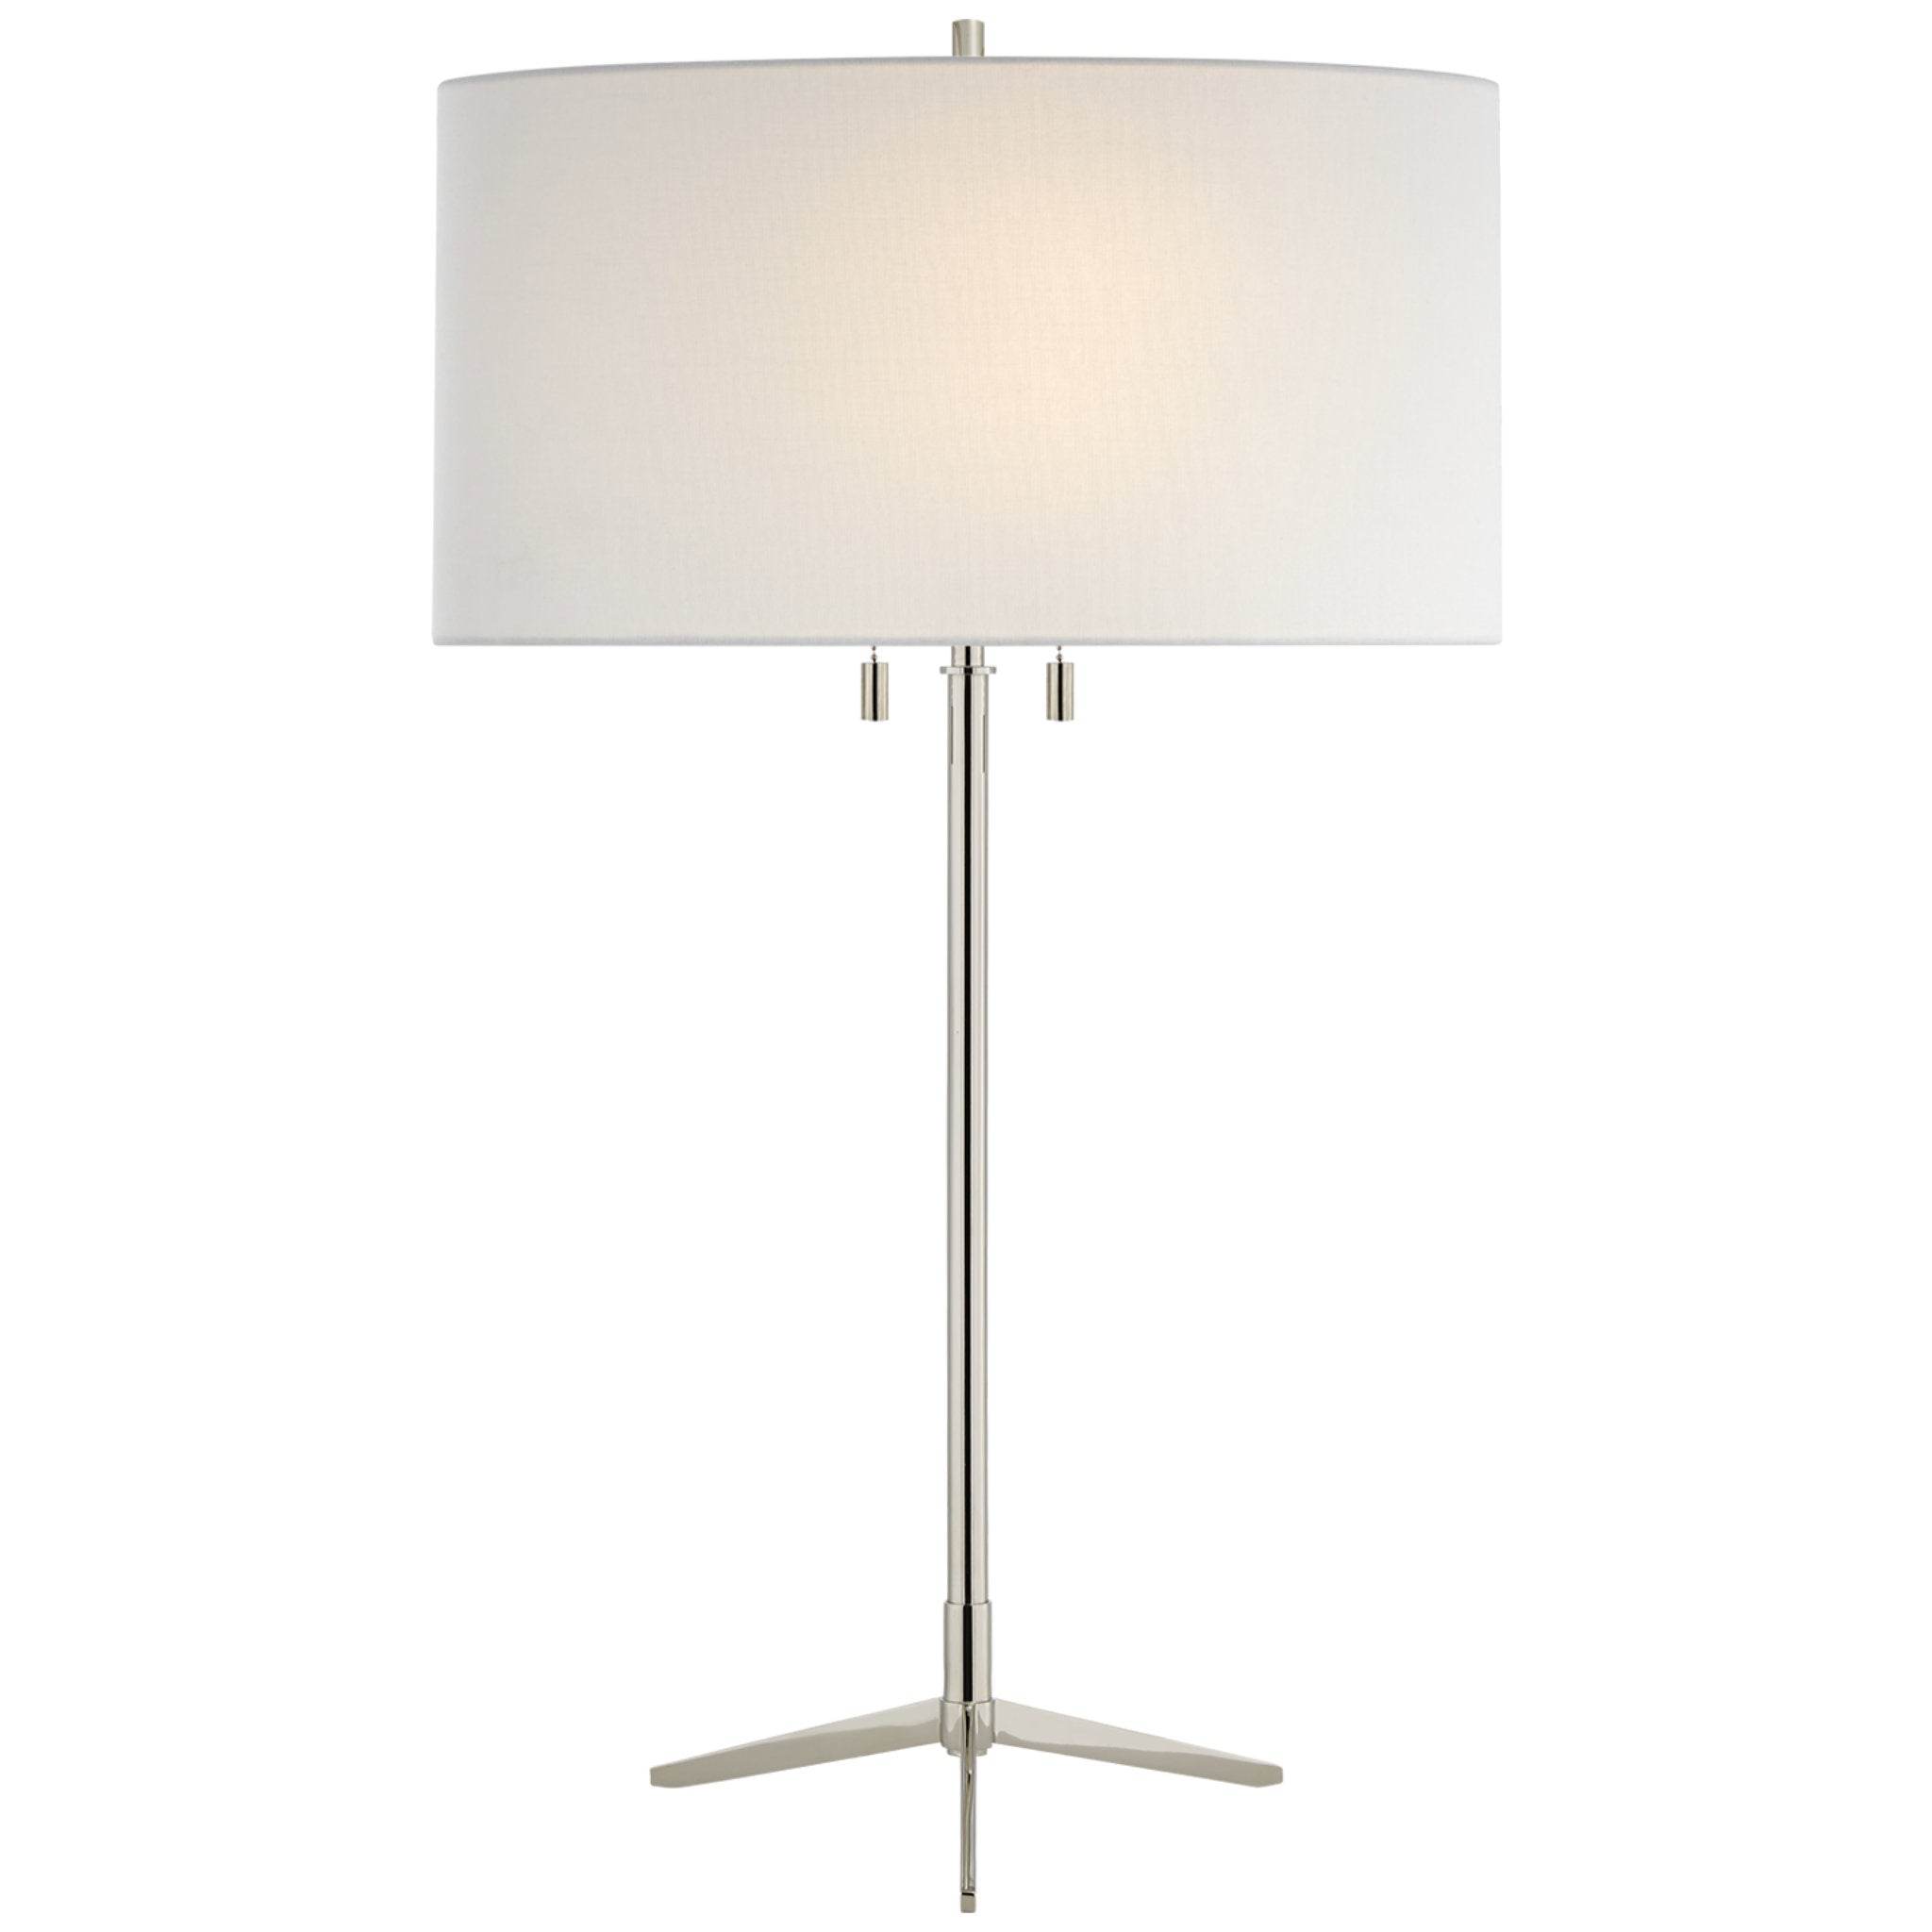 Thomas O'Brien Caron Table Lamp in Polished Nickel with Linen Shade